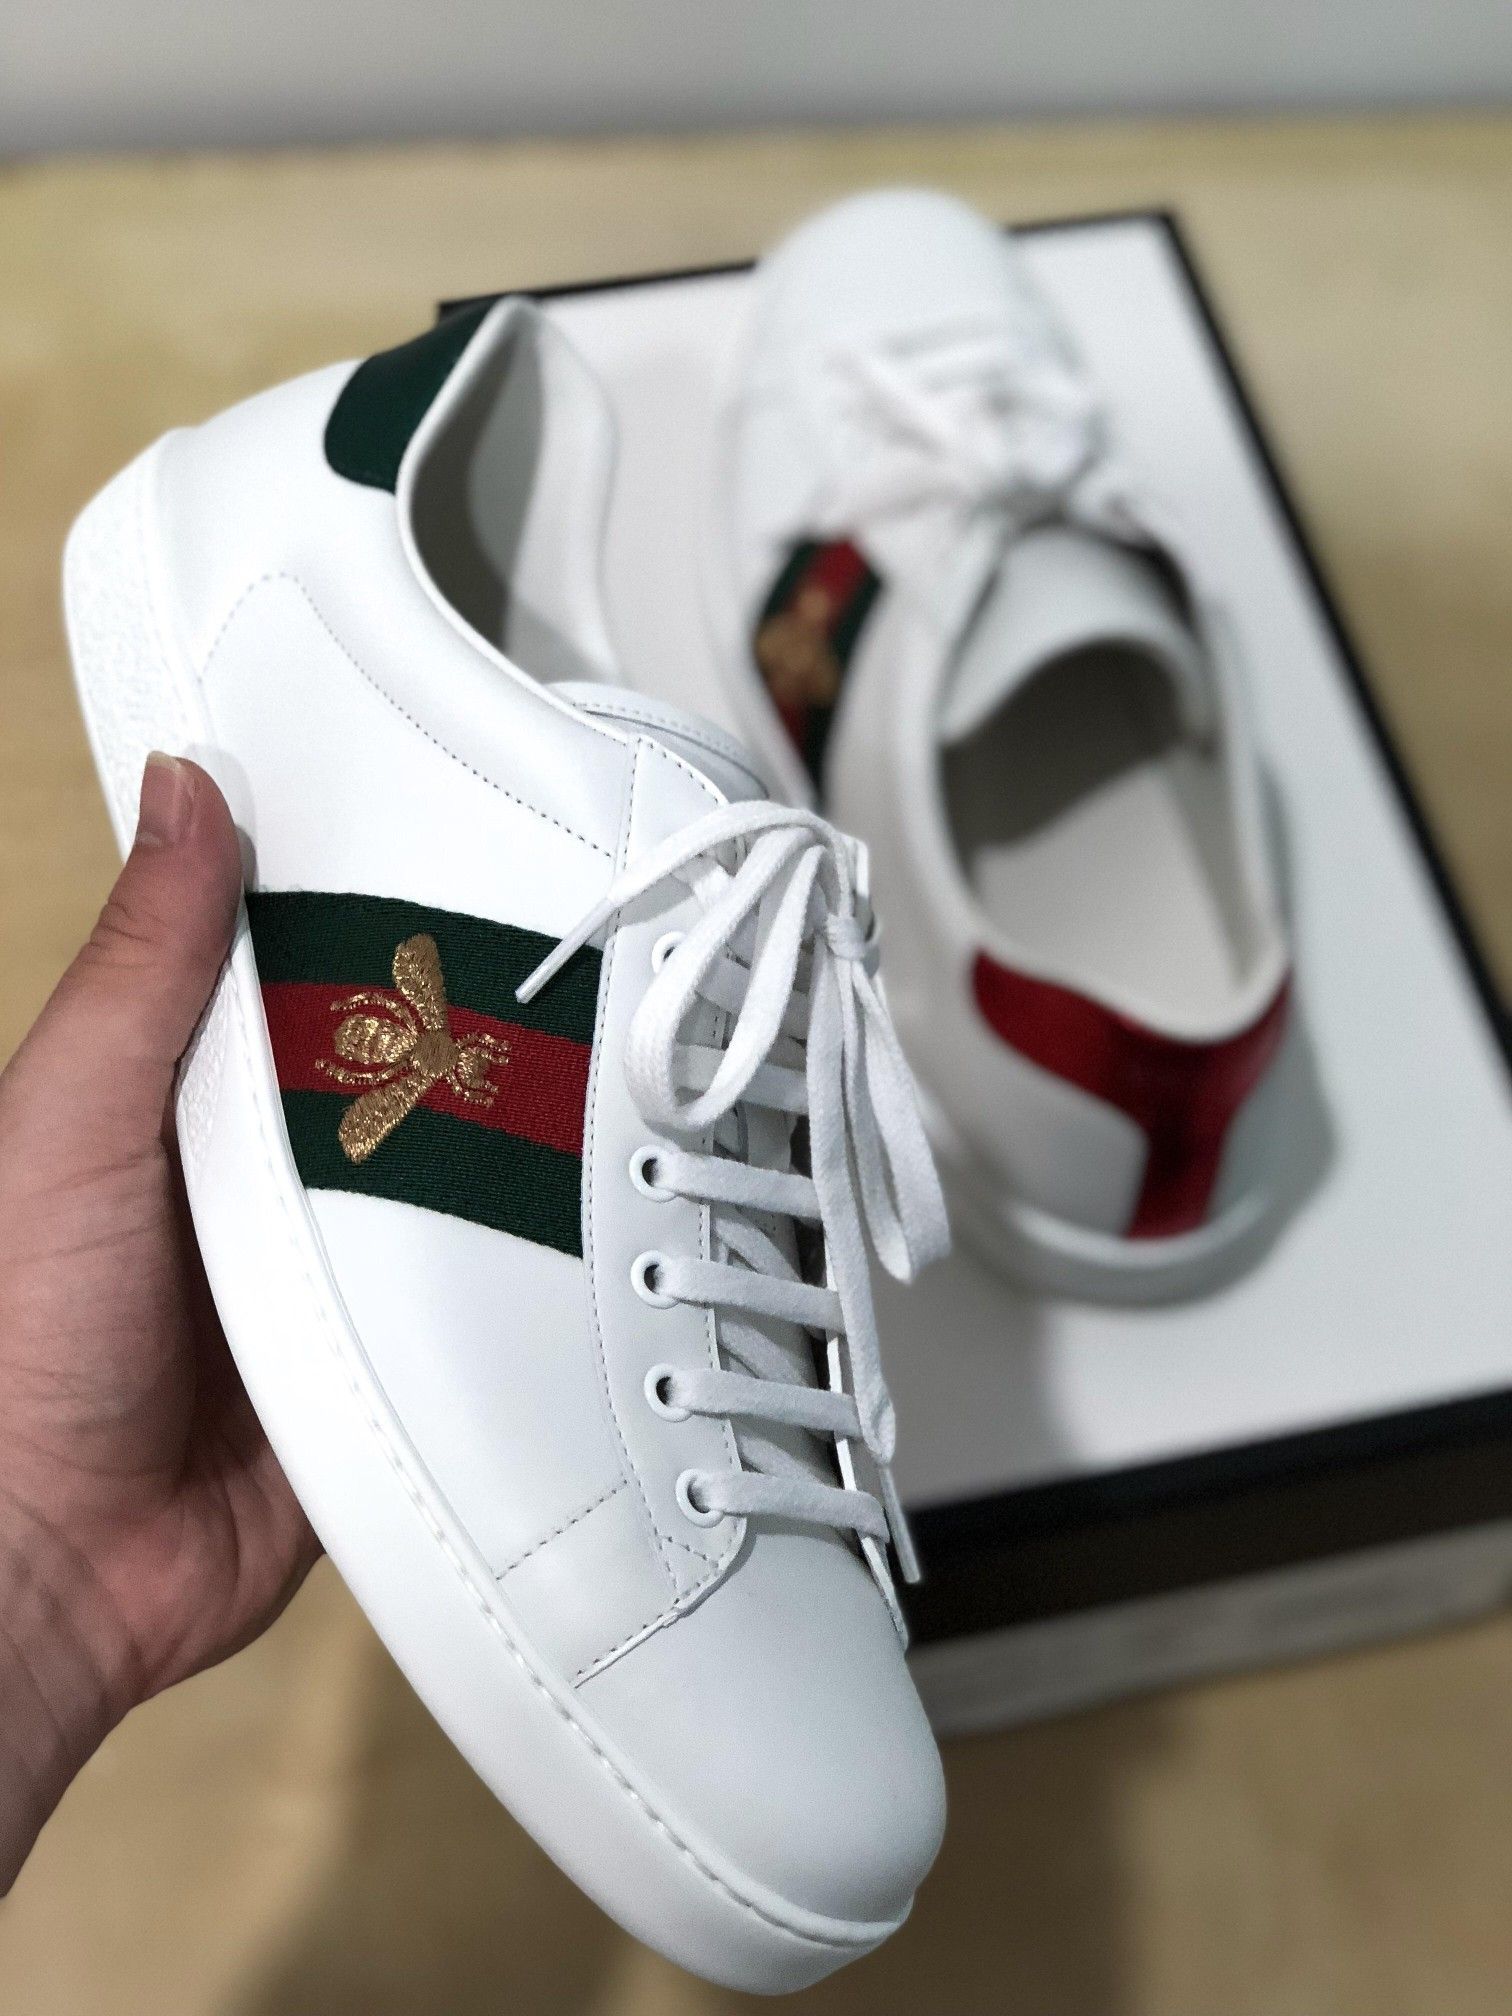 Gucci Ace Sneaker (Embroidered Bee)